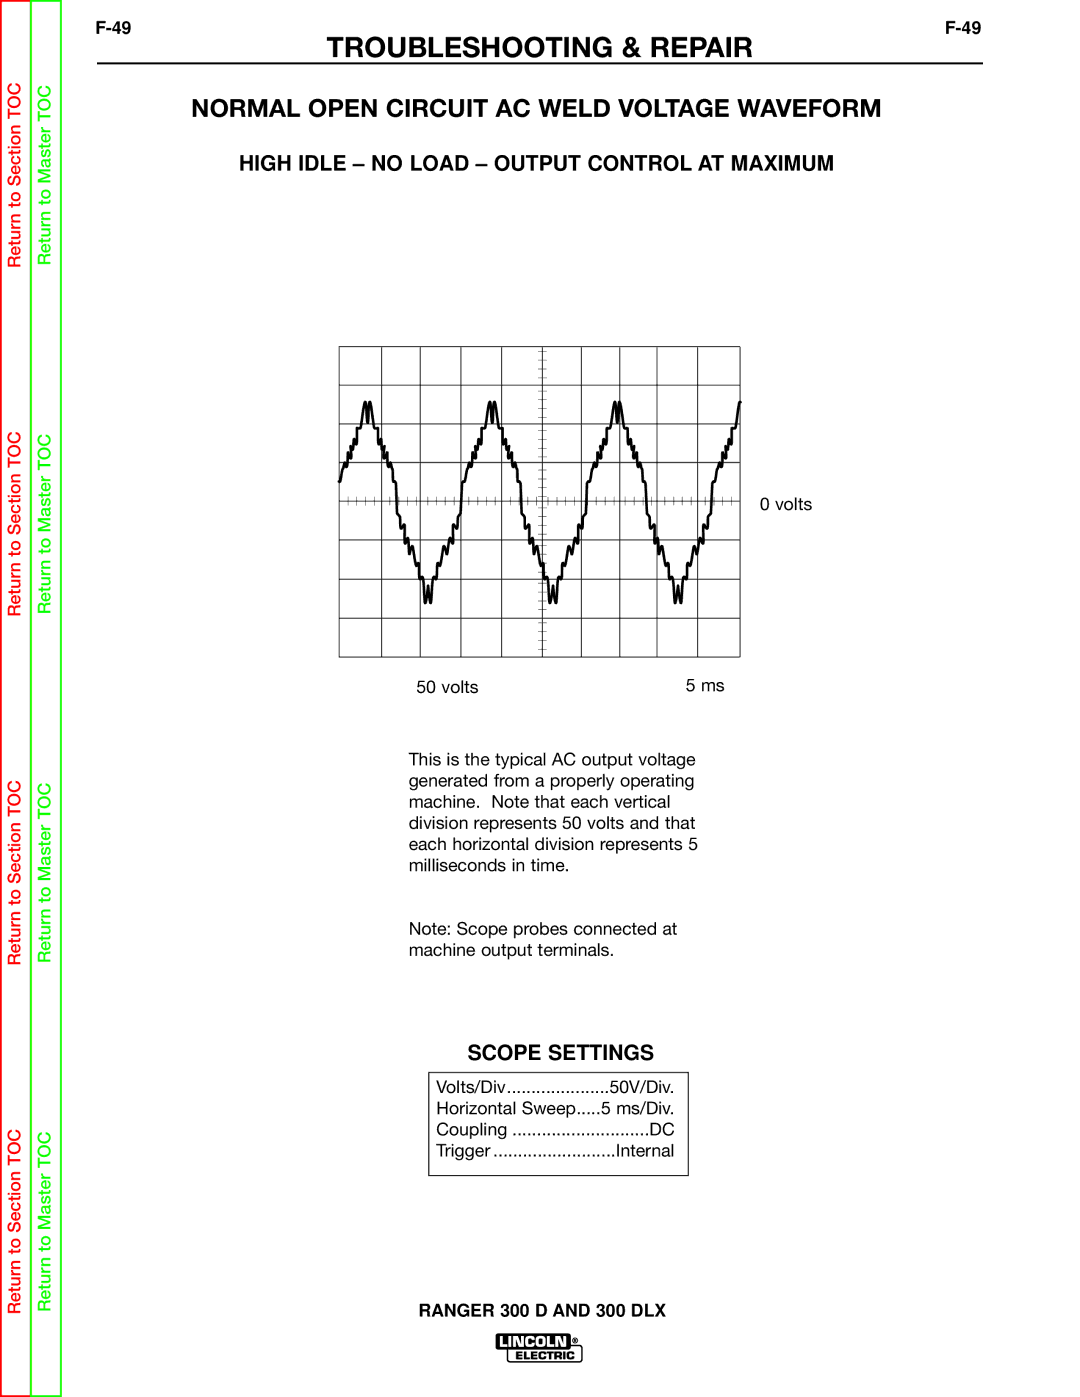 Lincoln Electric SVM148-B service manual Normal Open Circuit AC Weld Voltage Waveform 